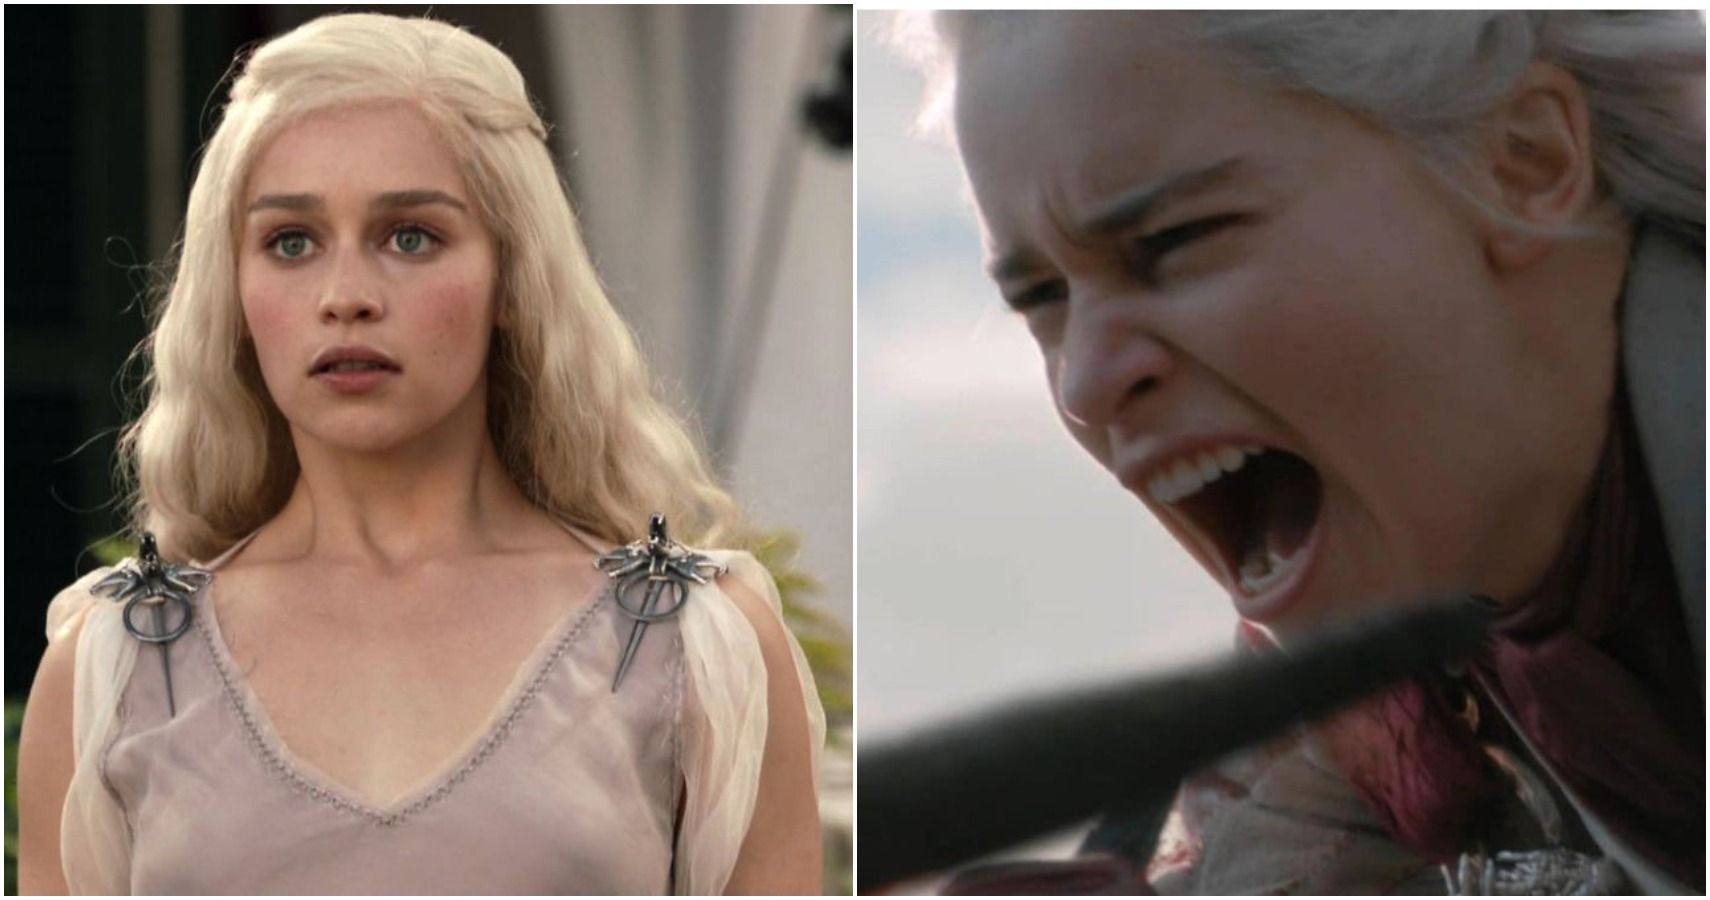 Game of Thrones 10 Mistakes That Led to Daenerys Downfall